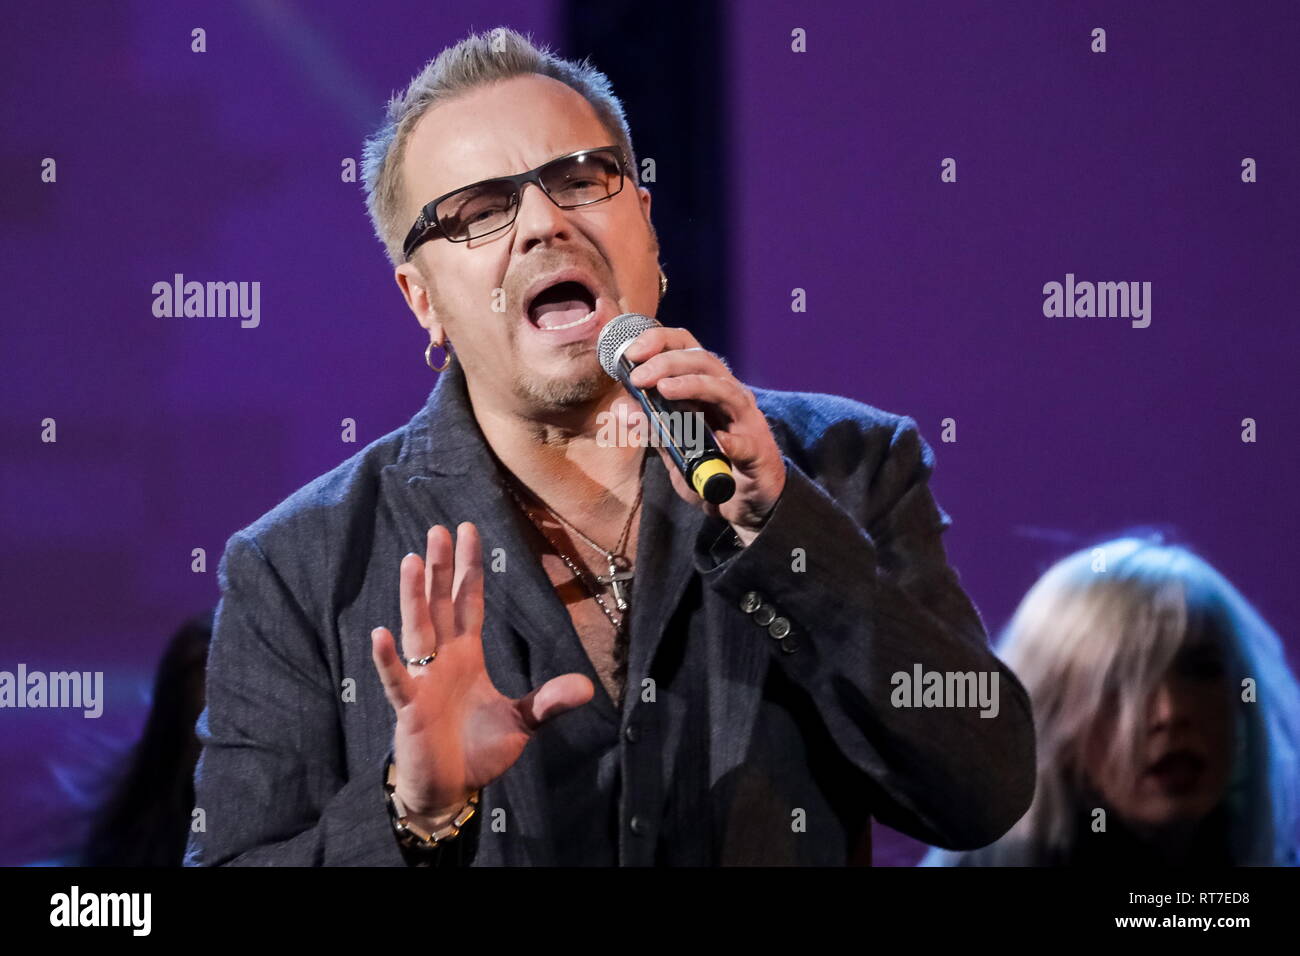 Moscow, Russia. 28th Feb, 2019. MOSCOW, RUSSIA - FEBRUARY 28, 2019: Singer  Vladimir Presnyakov performs during a ceremony to present the 2018 ZD  Awards Russian pop music prize (Zvukovaya Dorozhka MK-2018) at